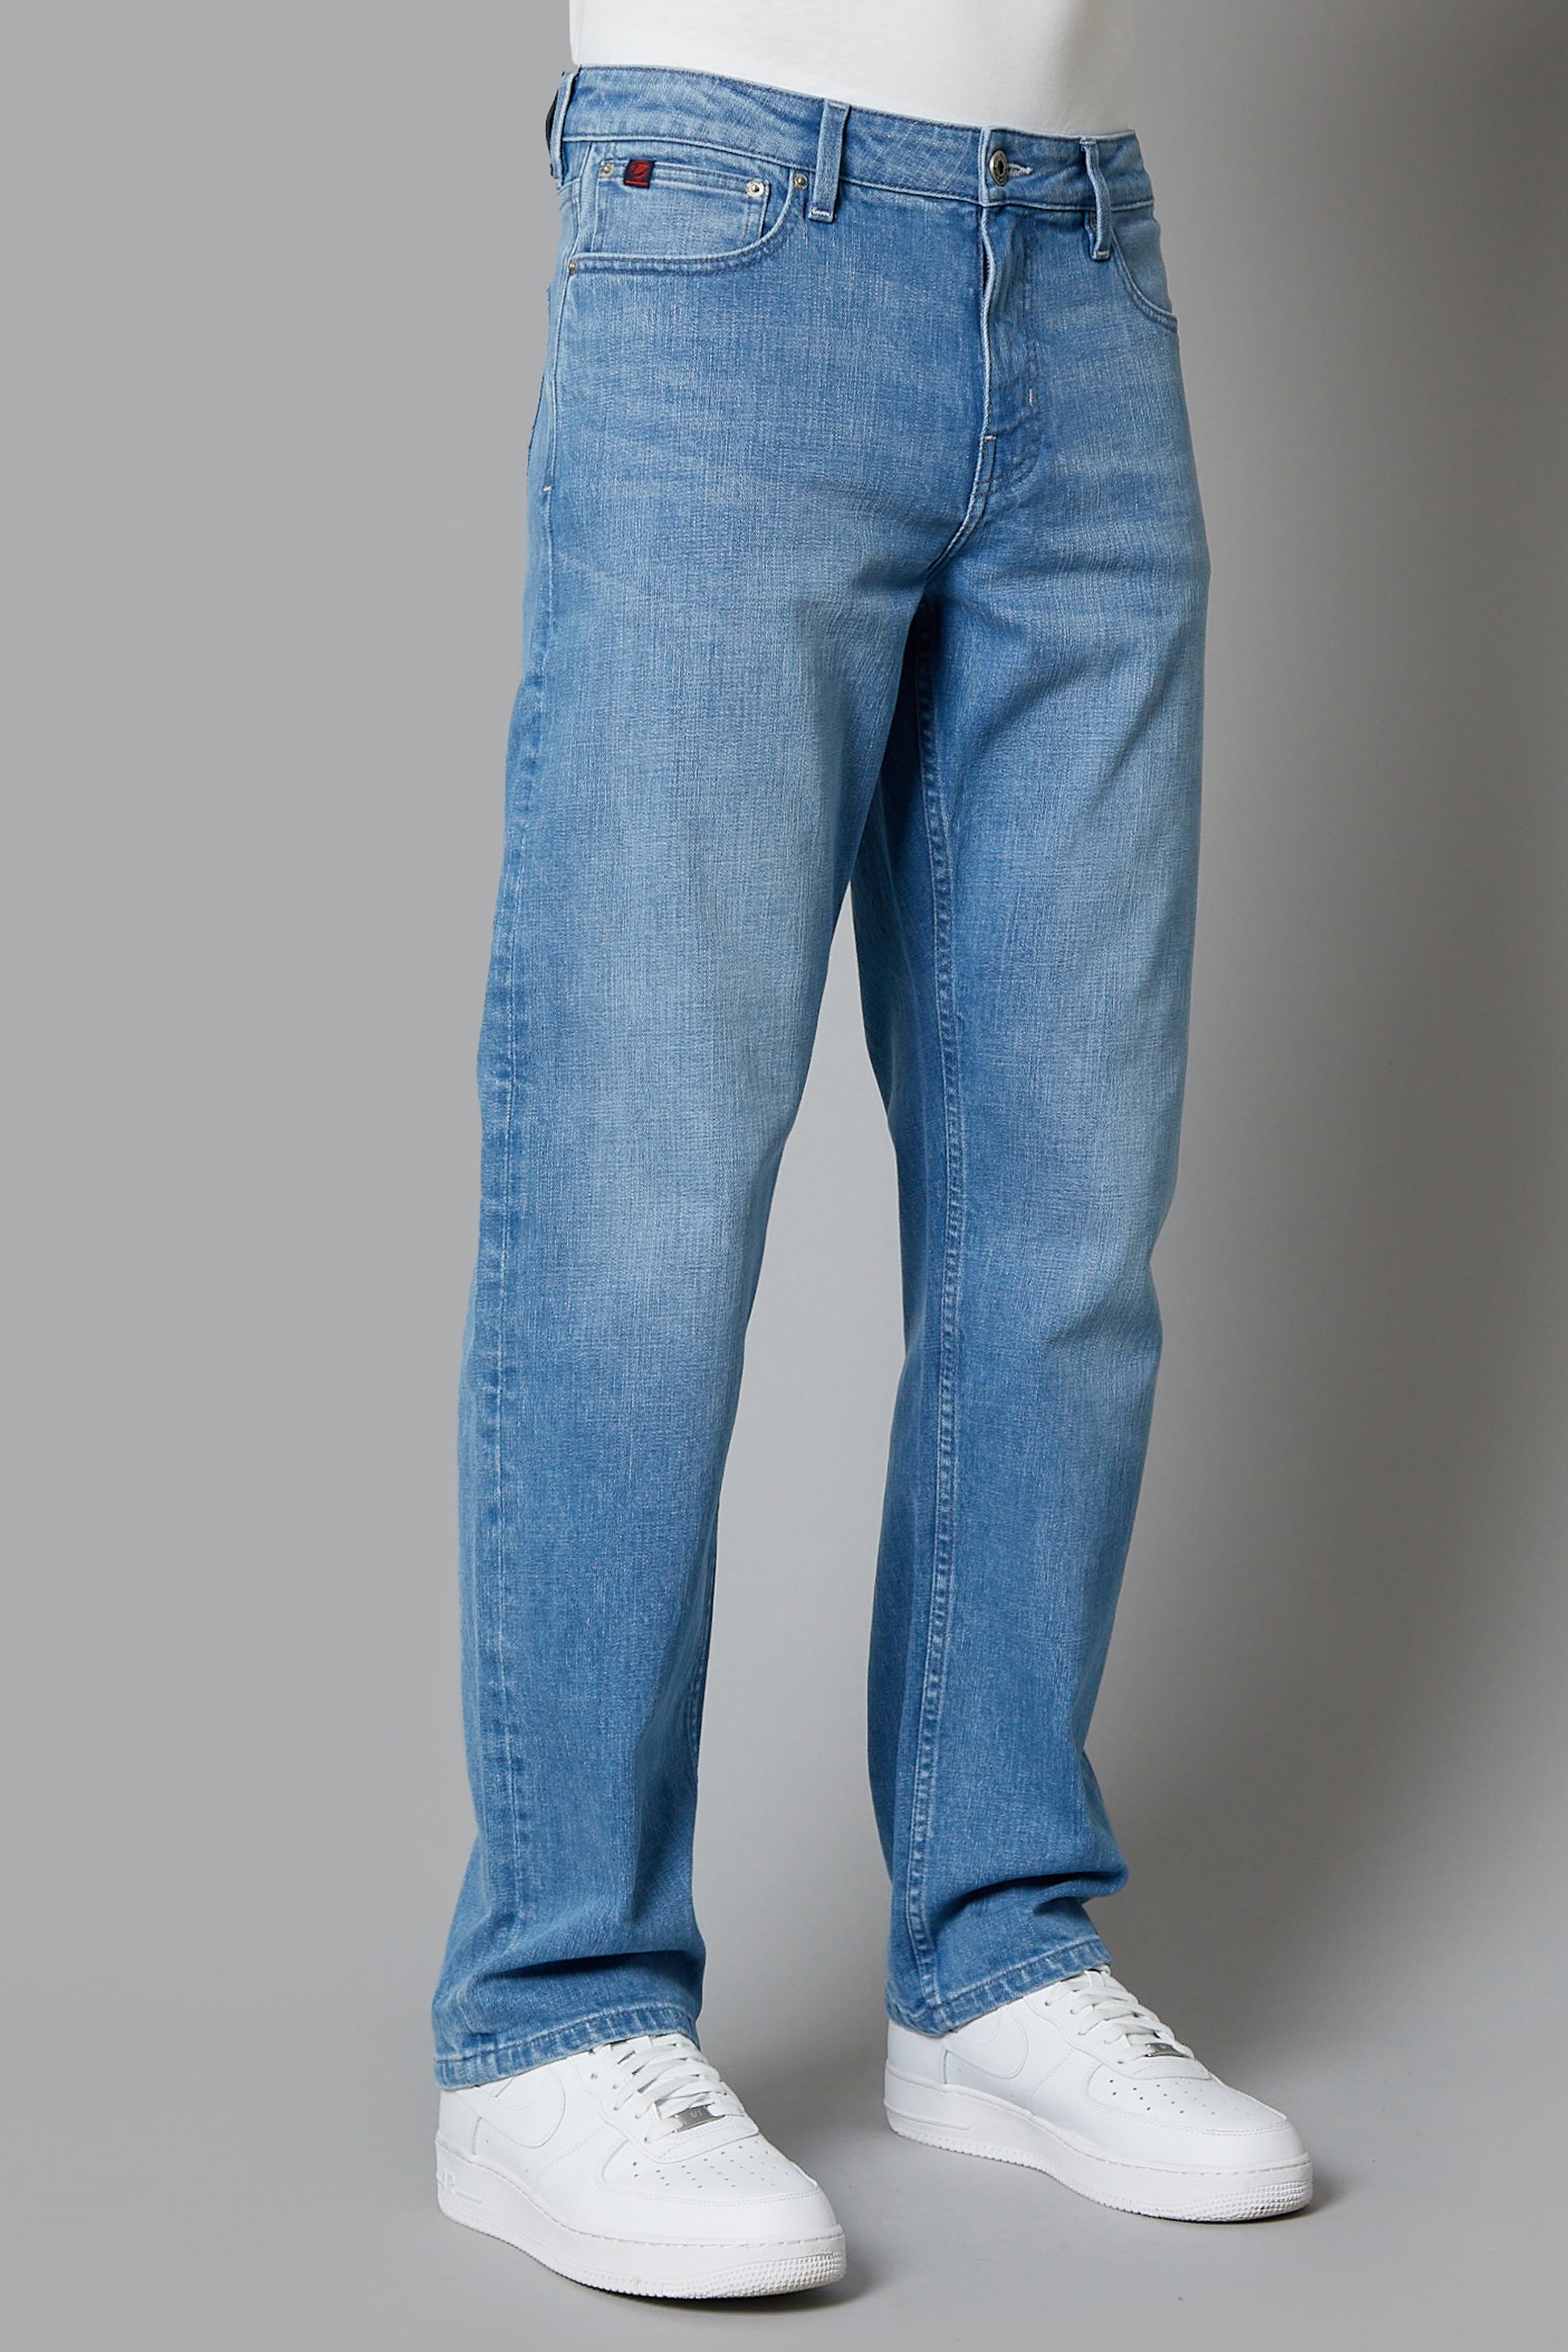 DML Jeans Montana Loose Fit Jeans In Light Blue Comfort Stretch